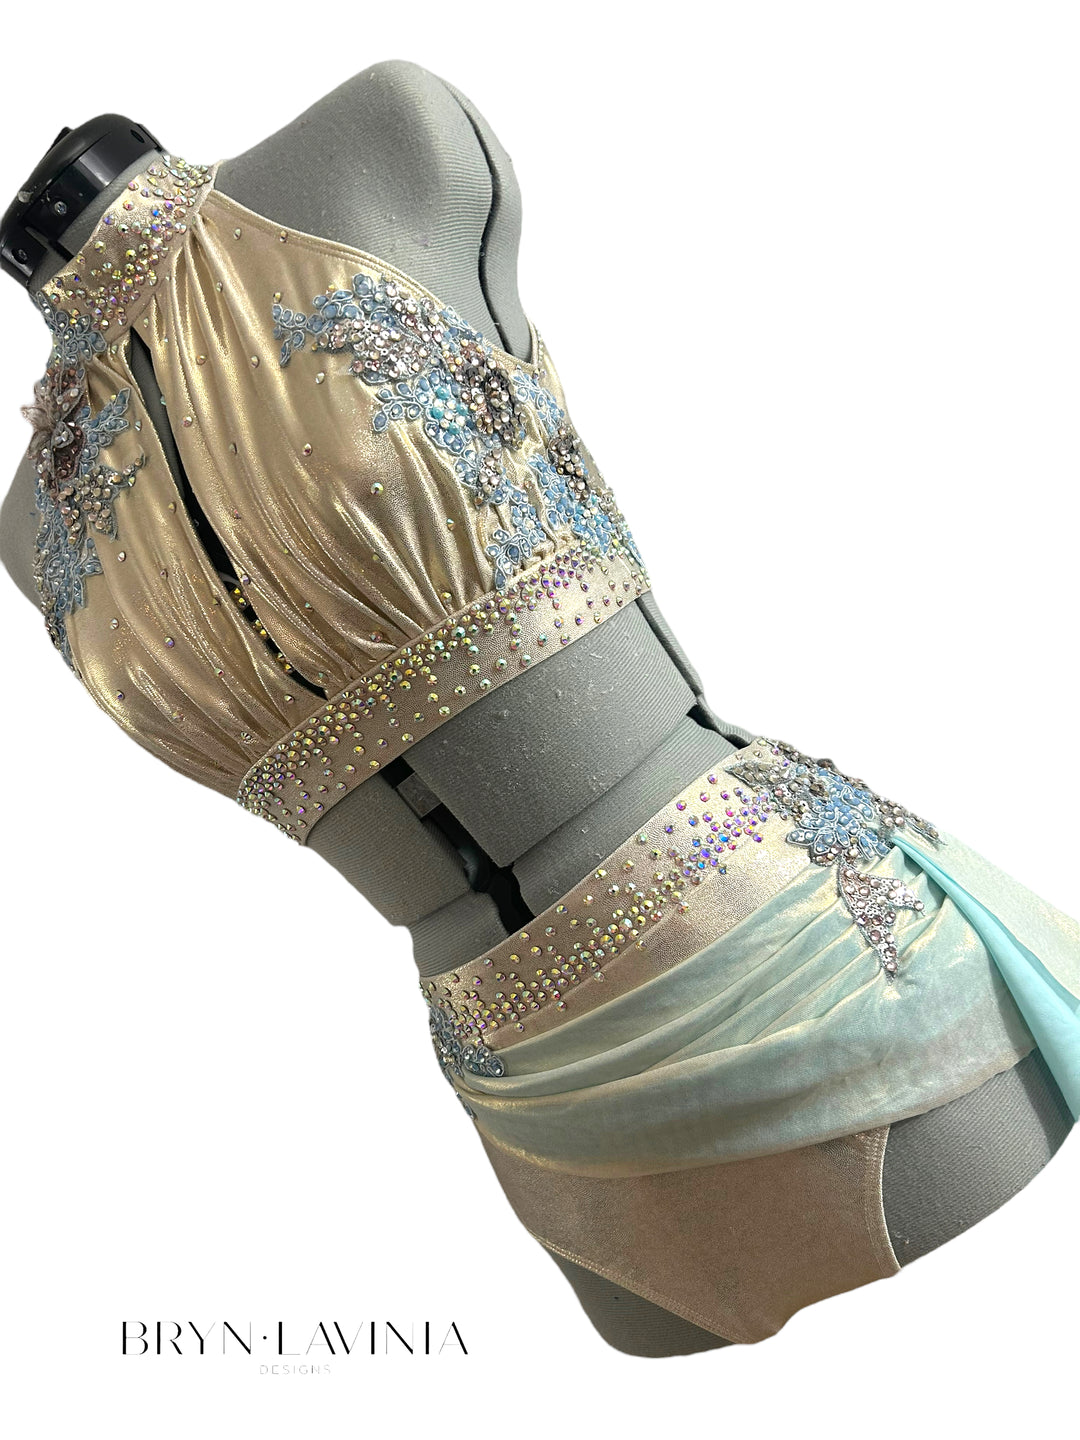 NEW AS Metallic Champagne/Light Blue ready to ship costume